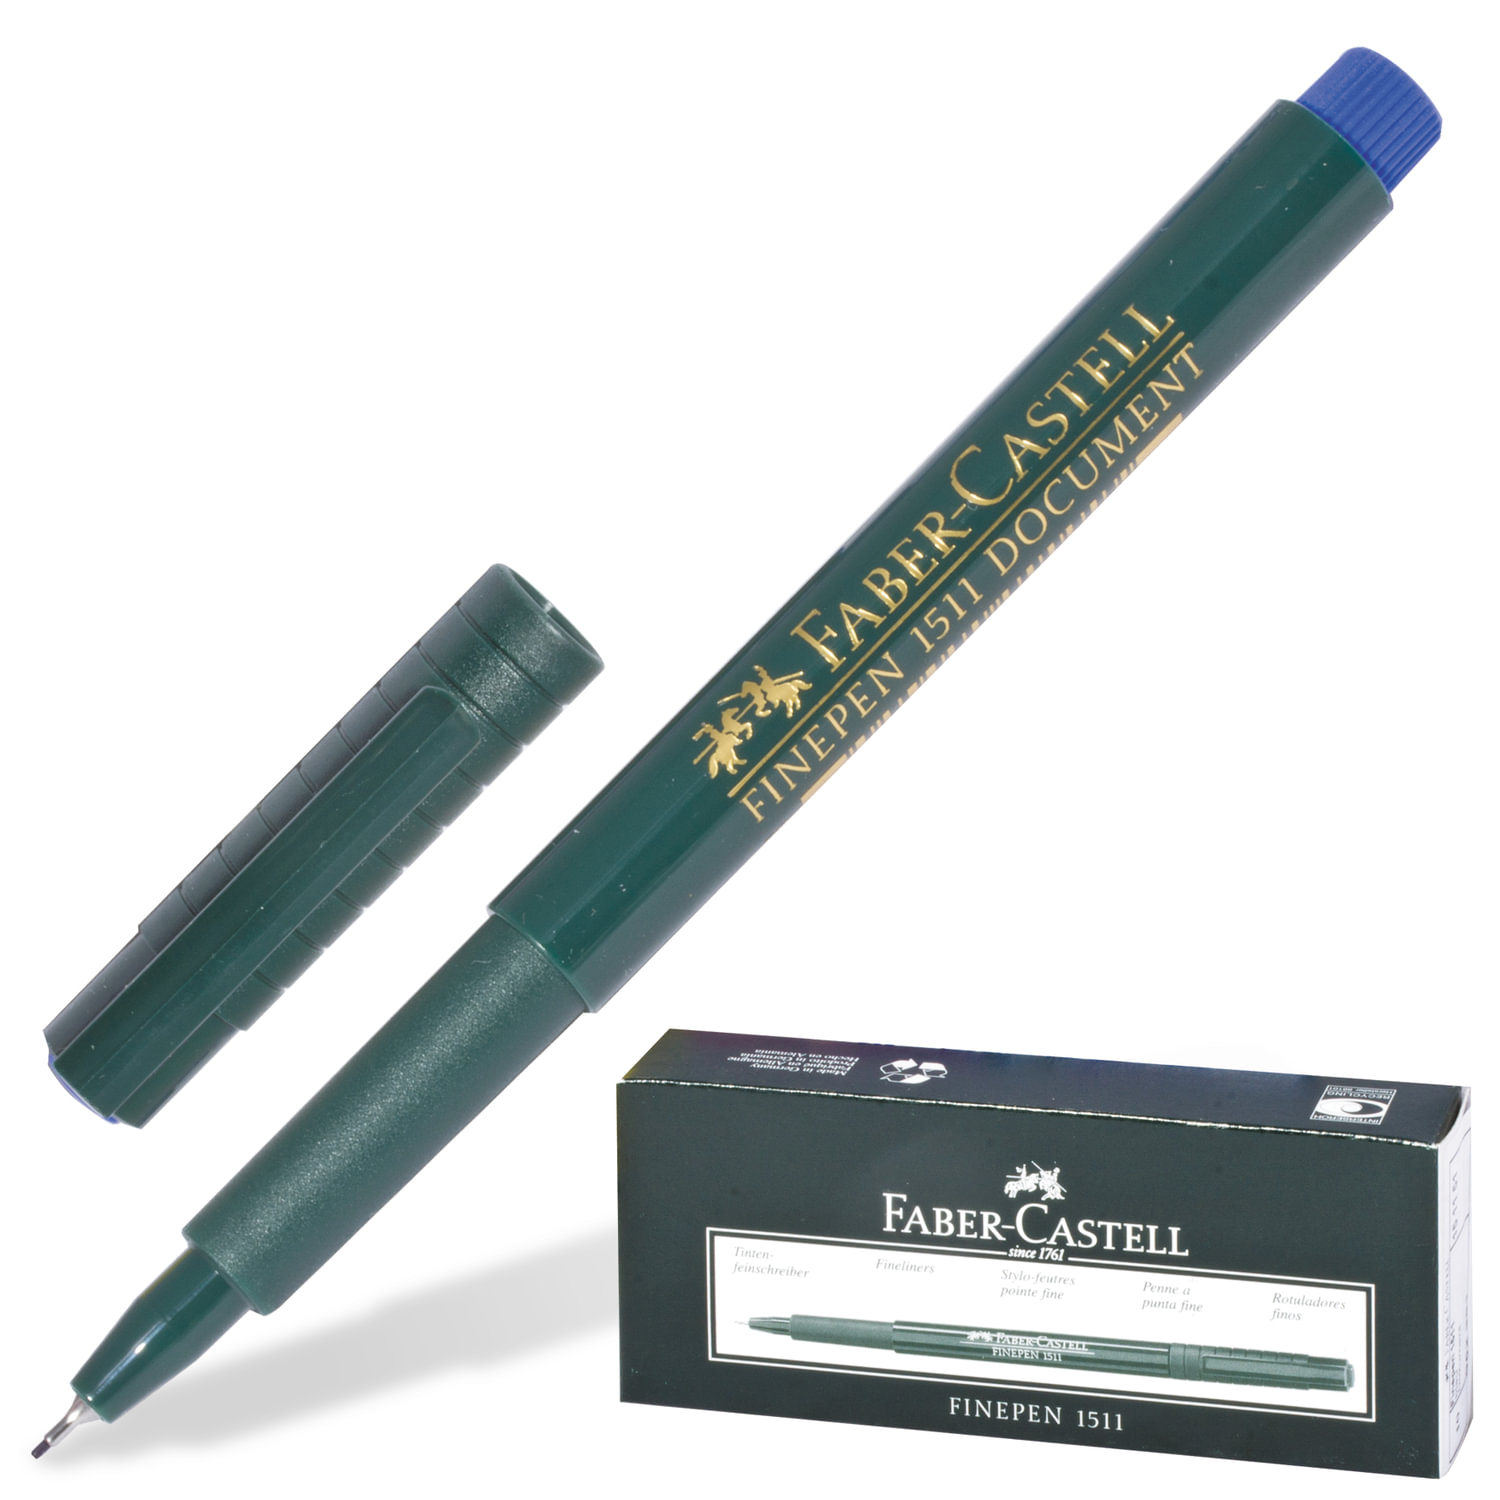  FABER-CASTELL 151151